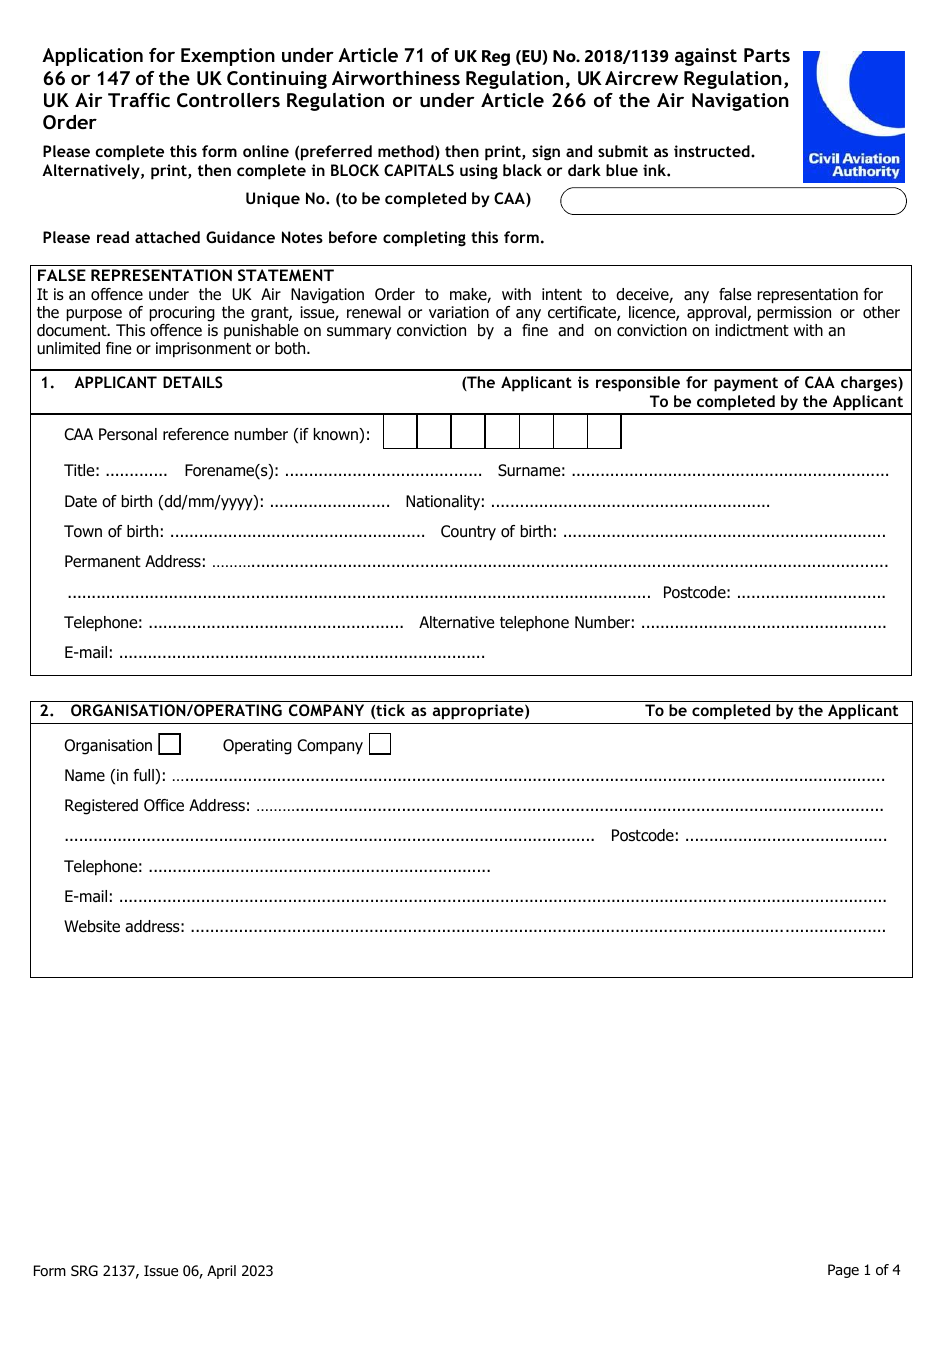 Form SRG2137 Application for Exemption Under Article 71 of UK Reg (Eu) No. 2018 / 1139 Against Parts 66 or 147 of the UK Continuing Airworthiness Regulation, UK Aircrew Regulation, UK Air Traffic Controllers Regulation or Under Article 266 of the Air Navigation Order - United Kingdom, Page 1